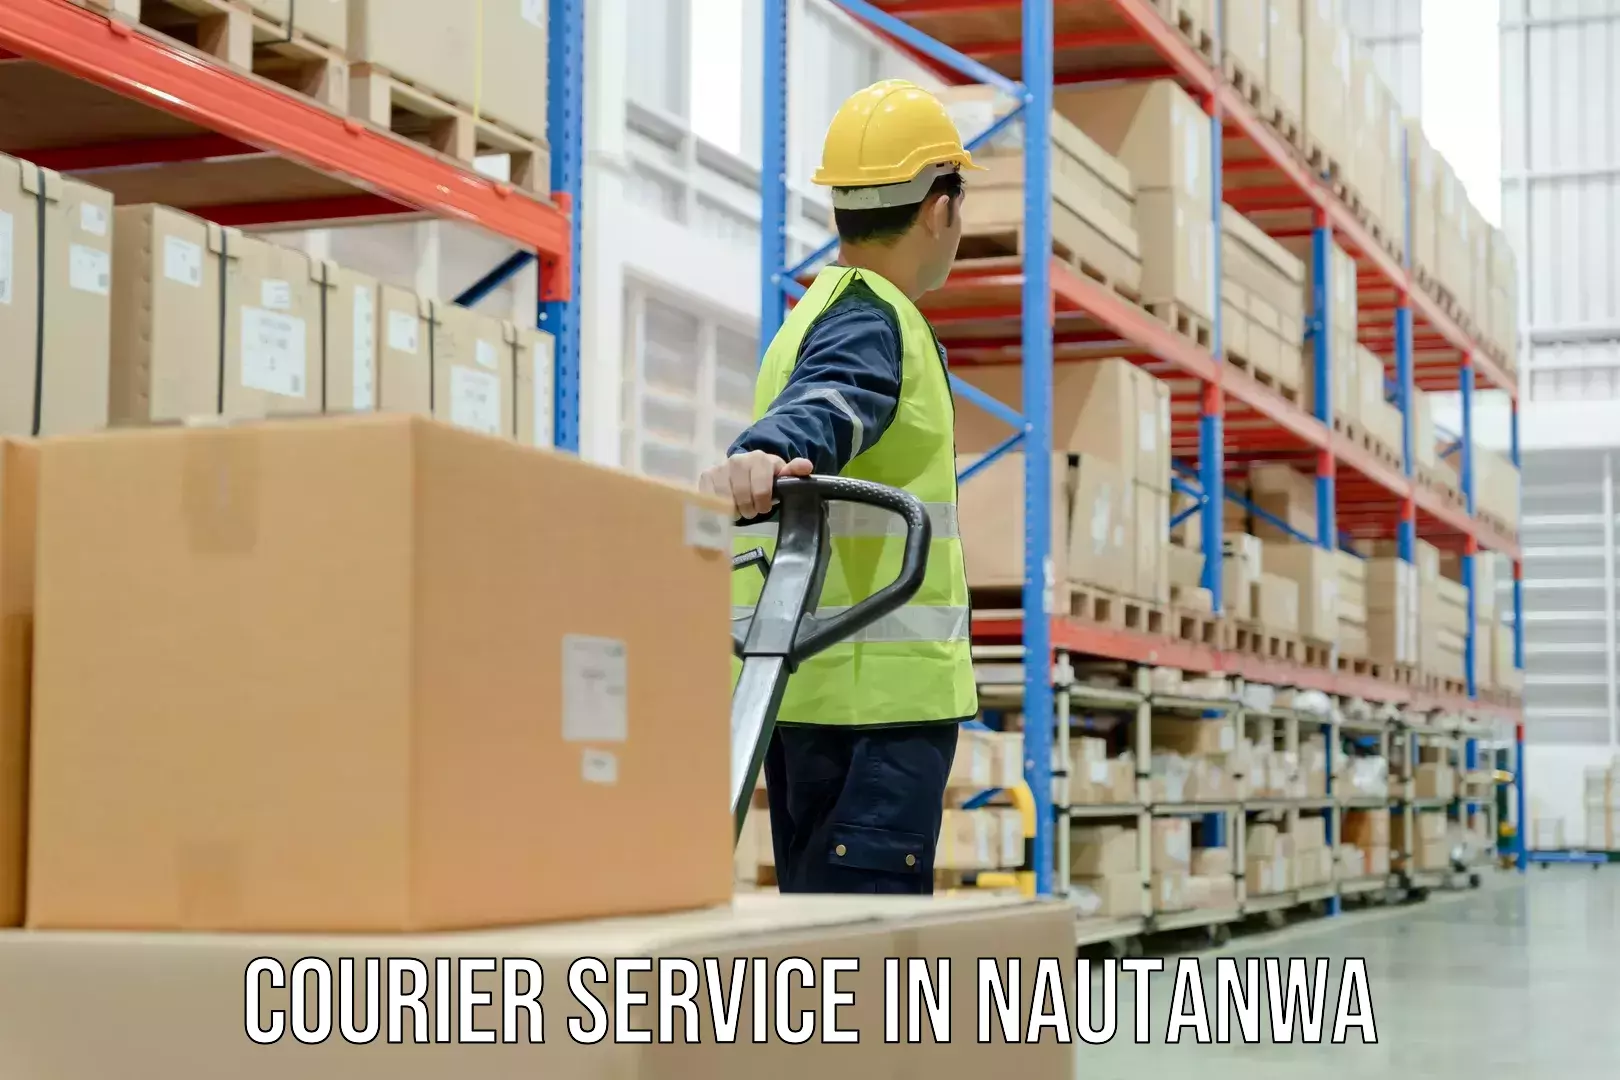 Personal courier services in Nautanwa